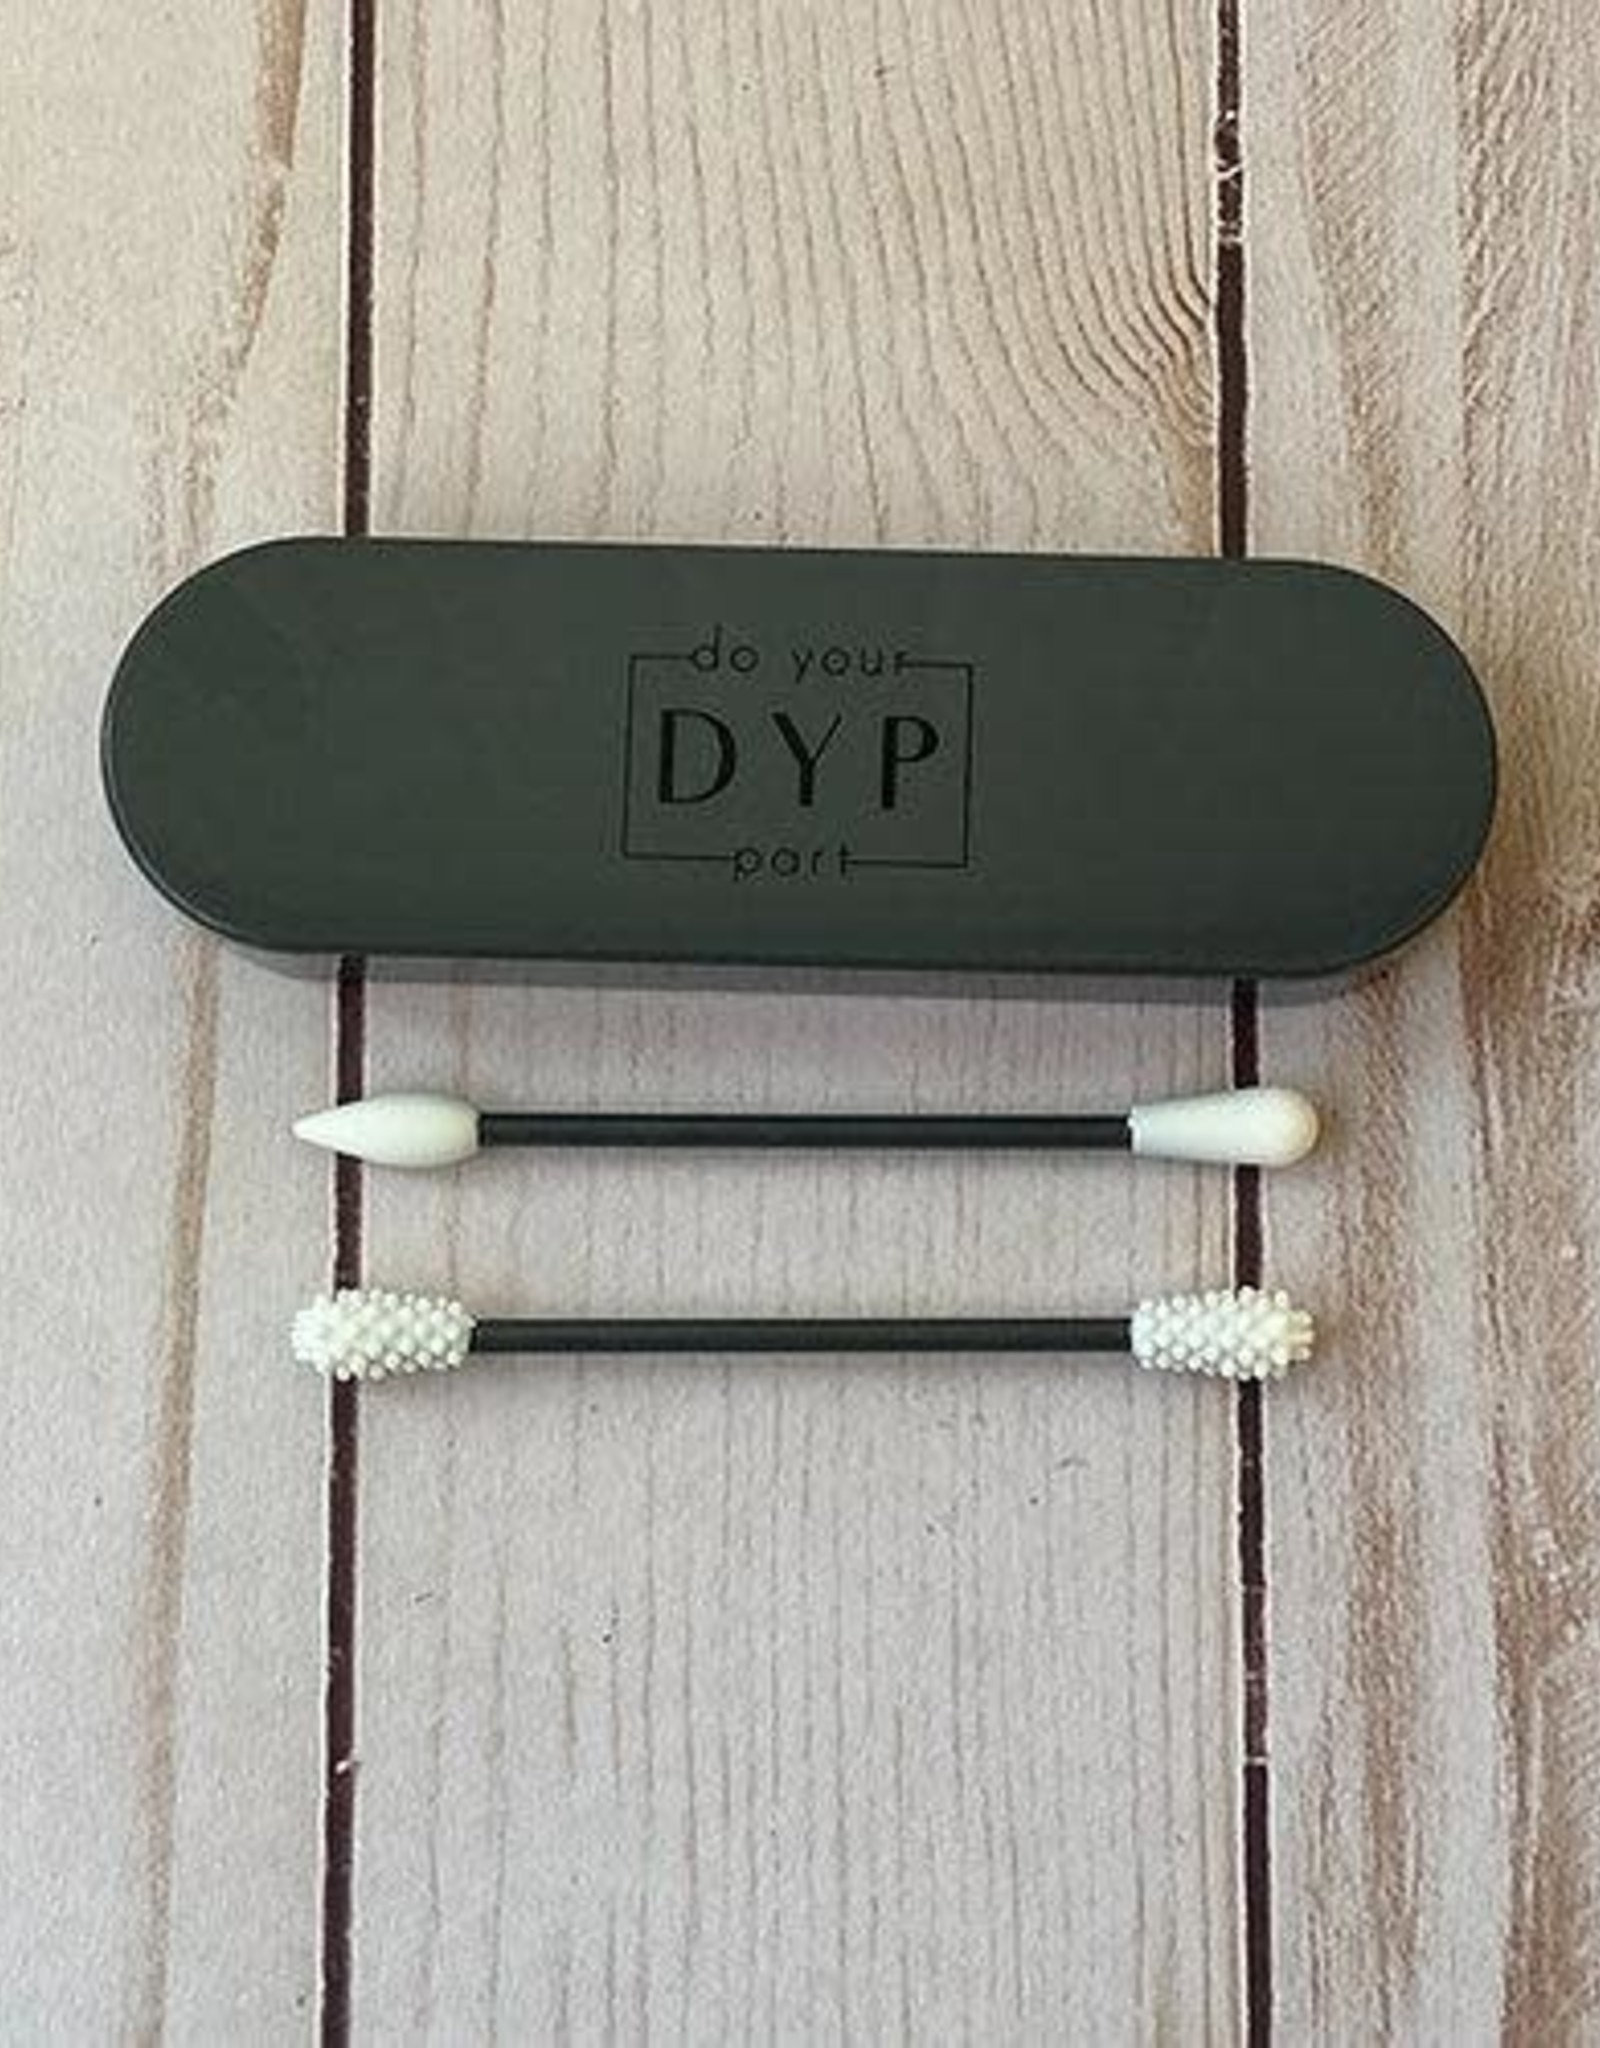 DYP DYP Reusable Ear Buds